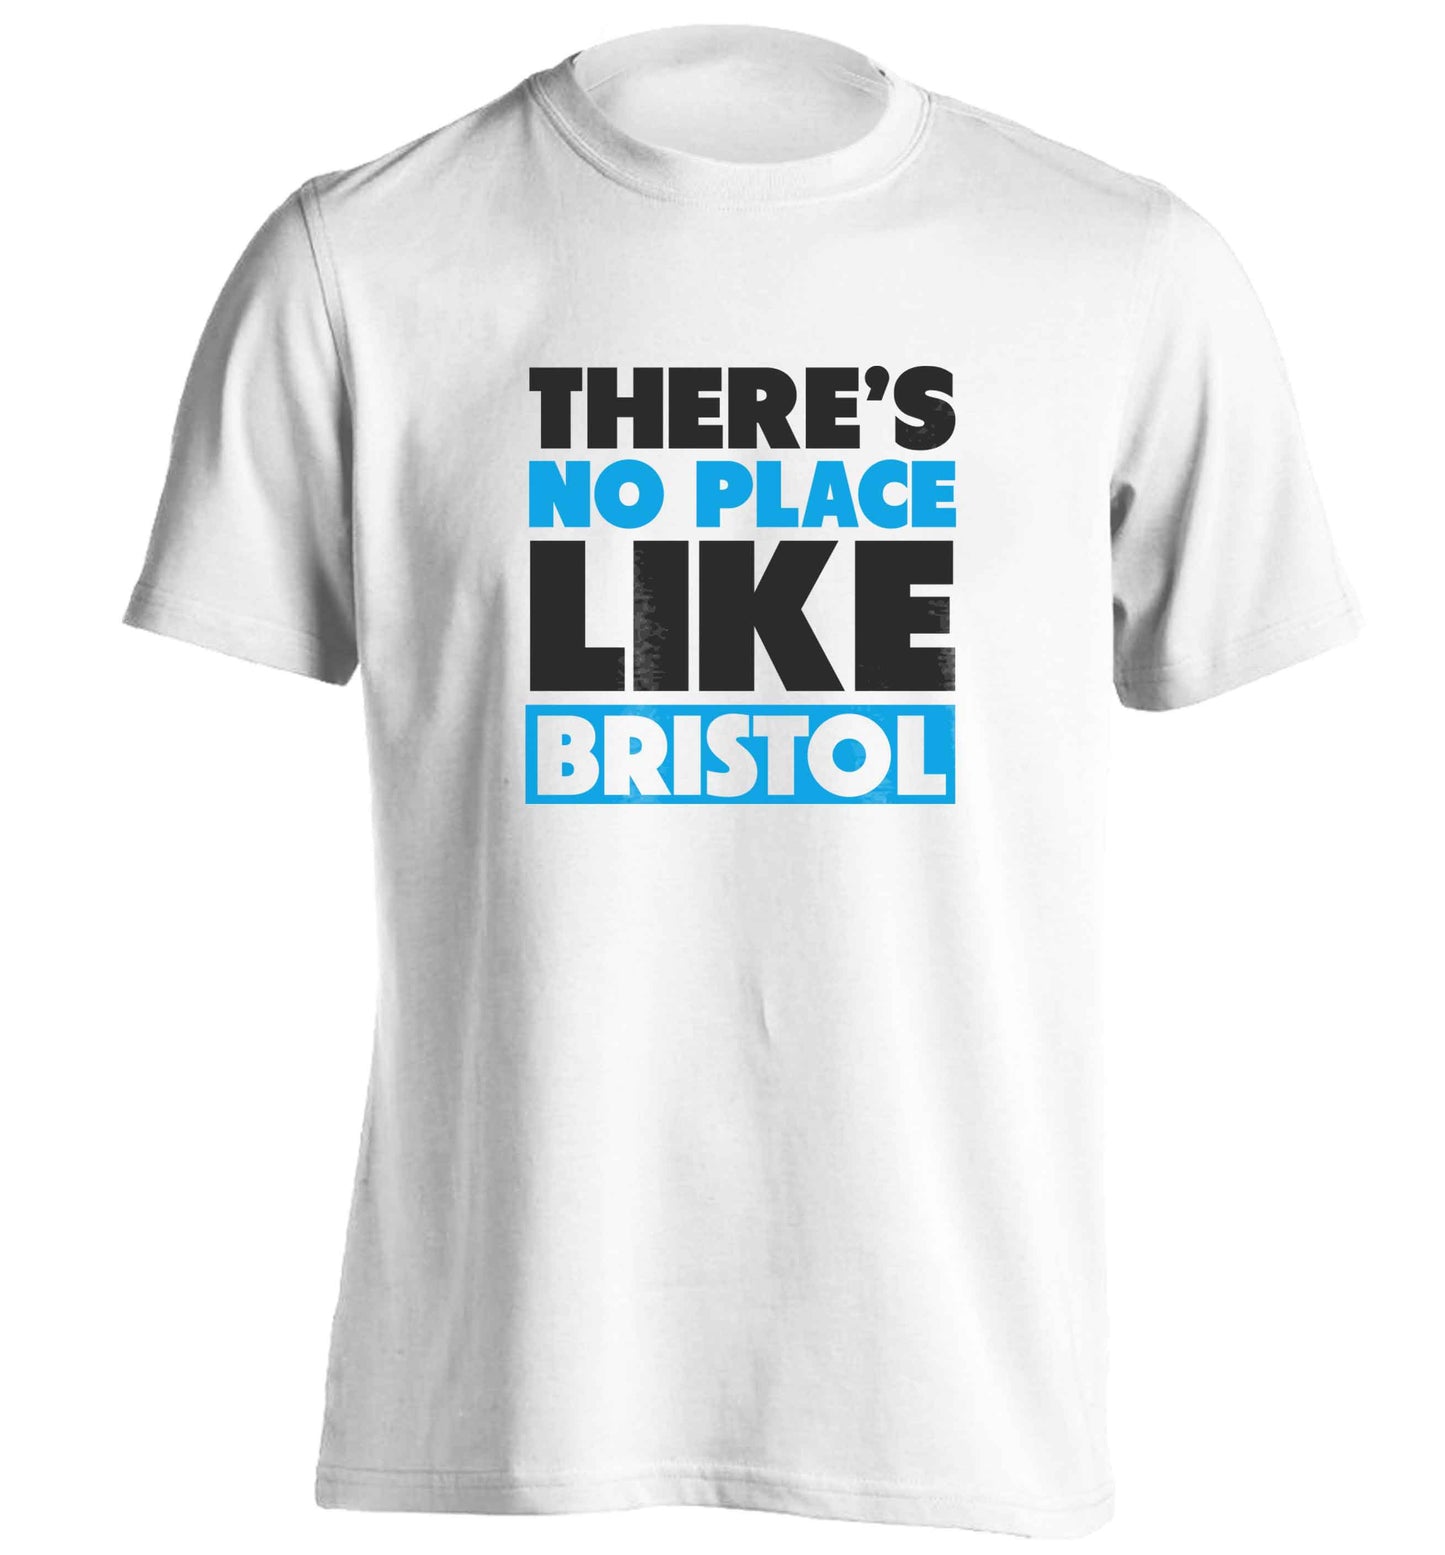 There's no place like Bristol adults unisex white Tshirt 2XL